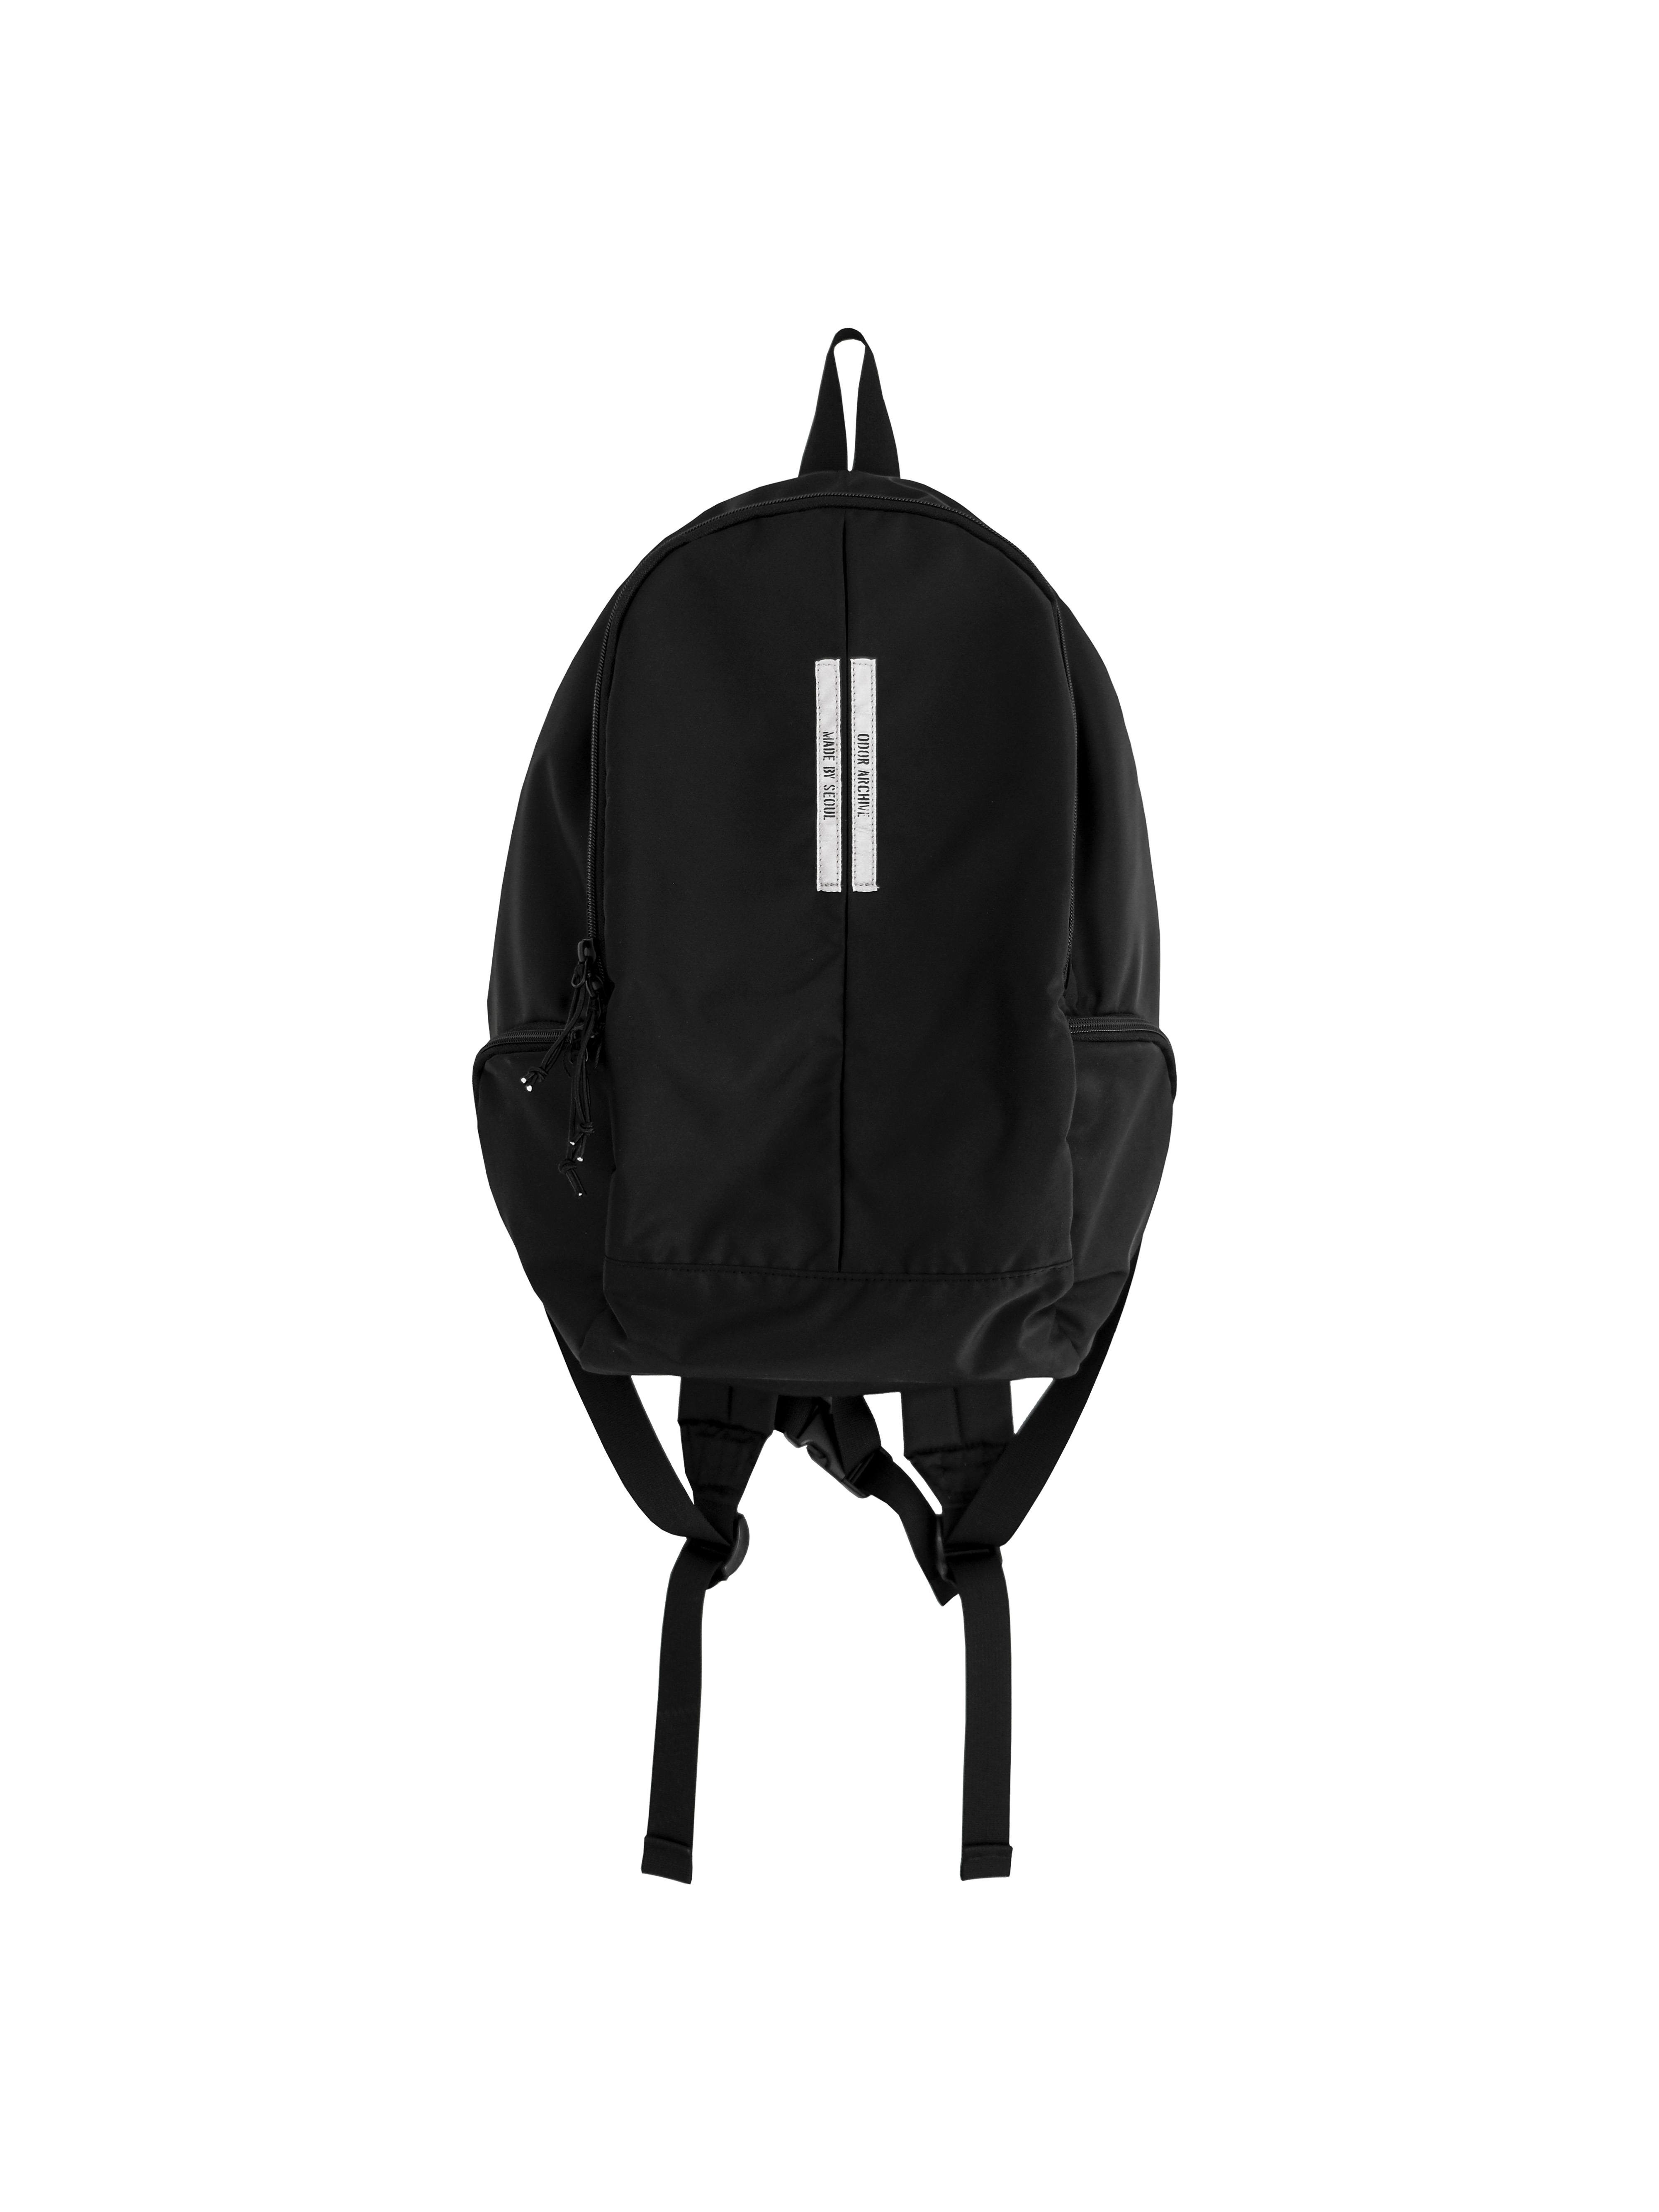 [ODOR MADE] Archive backpack